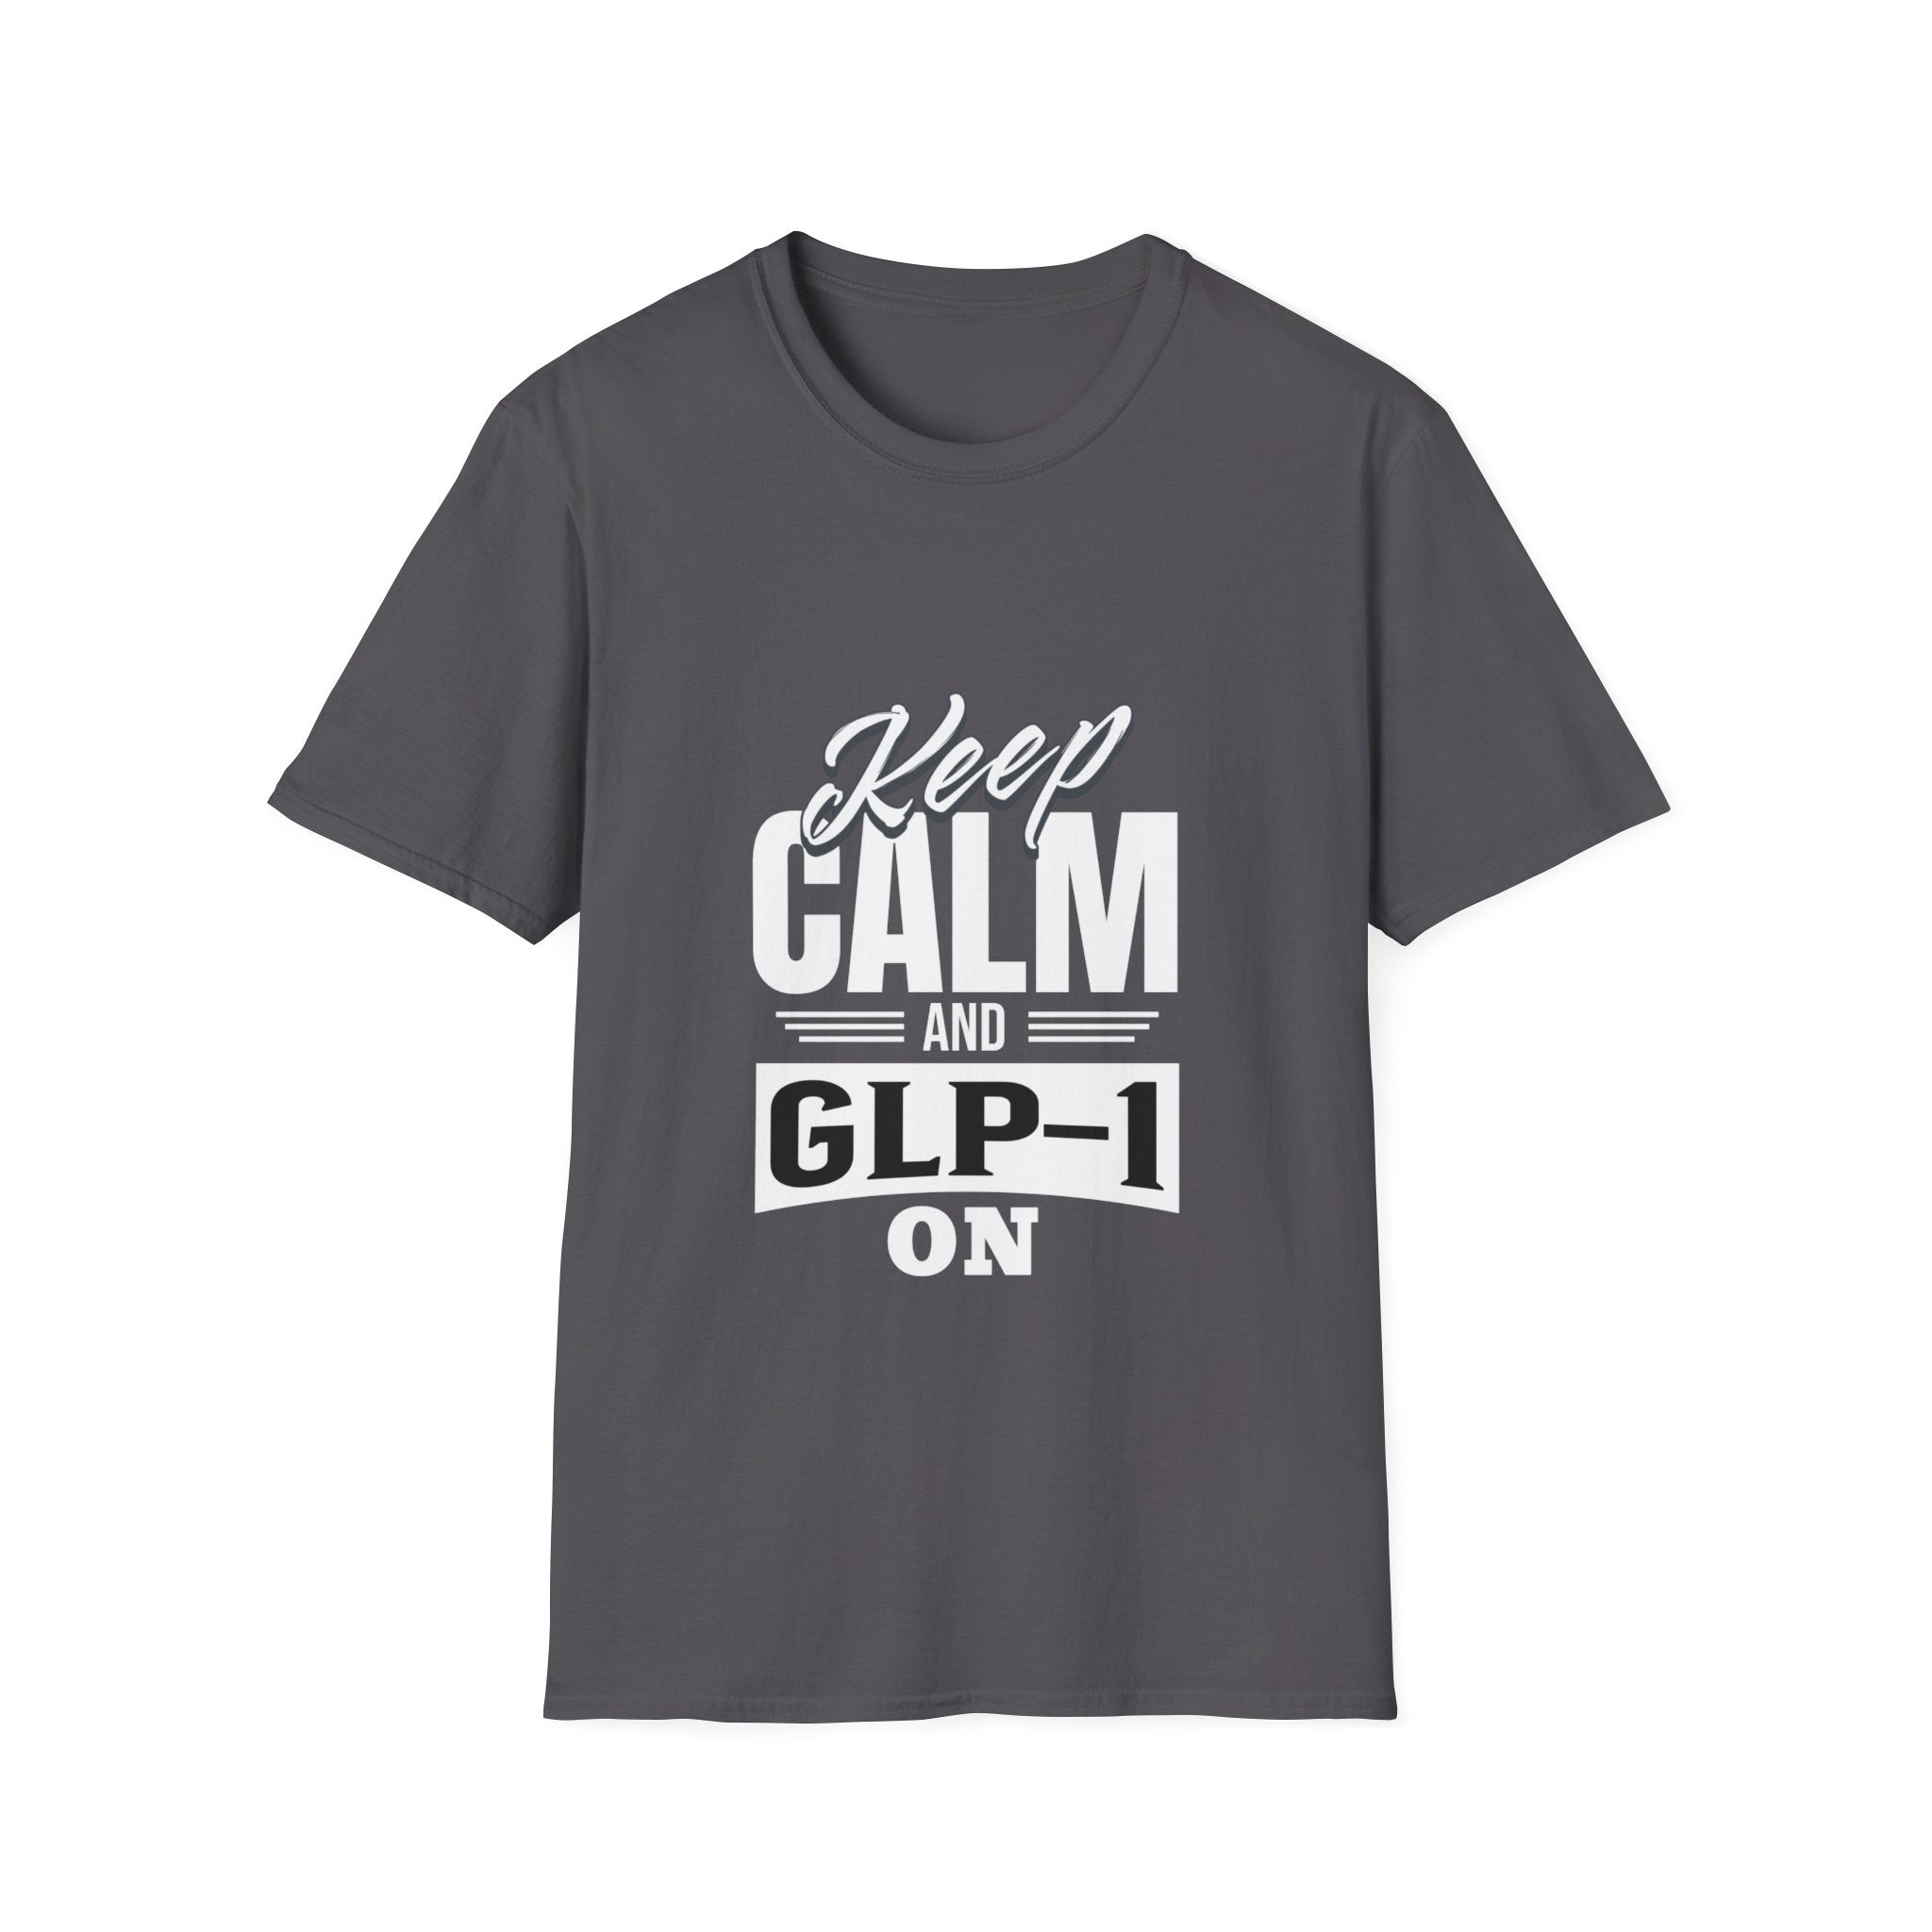 Keep Calm and GLP-1 On T-Shirt: Stay Cool and Motivated!